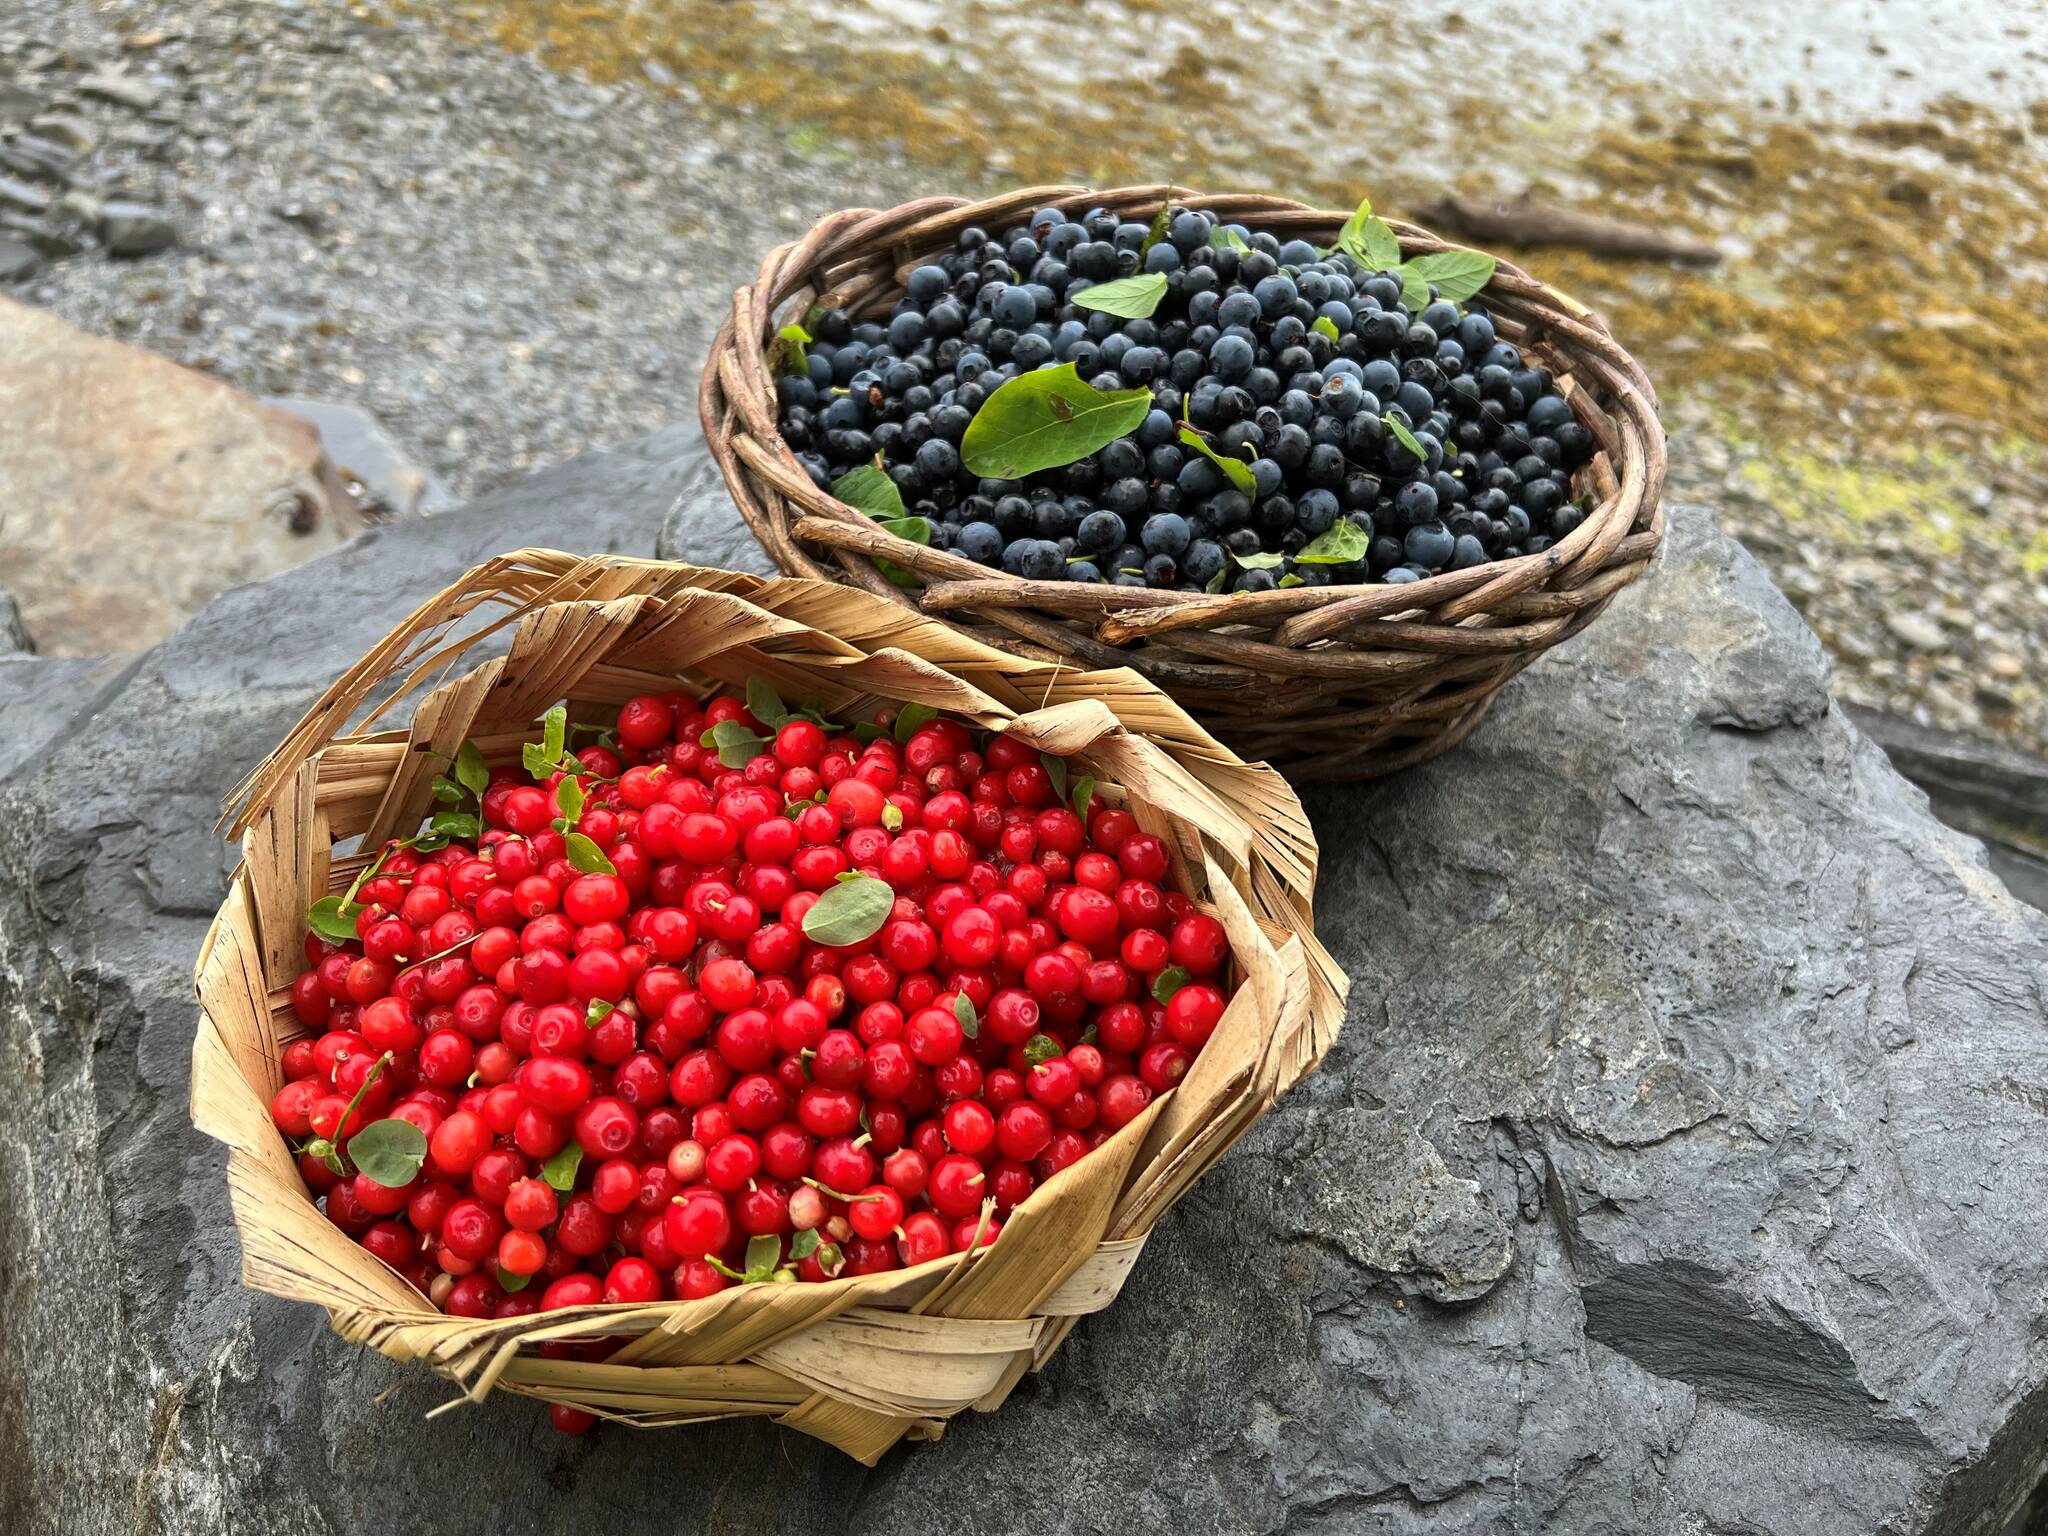 Courtesy Photo / Vivian Faith Prescott 
Red huckleberries and blueberries in Wrangell at Mickey’s Fishcamp.